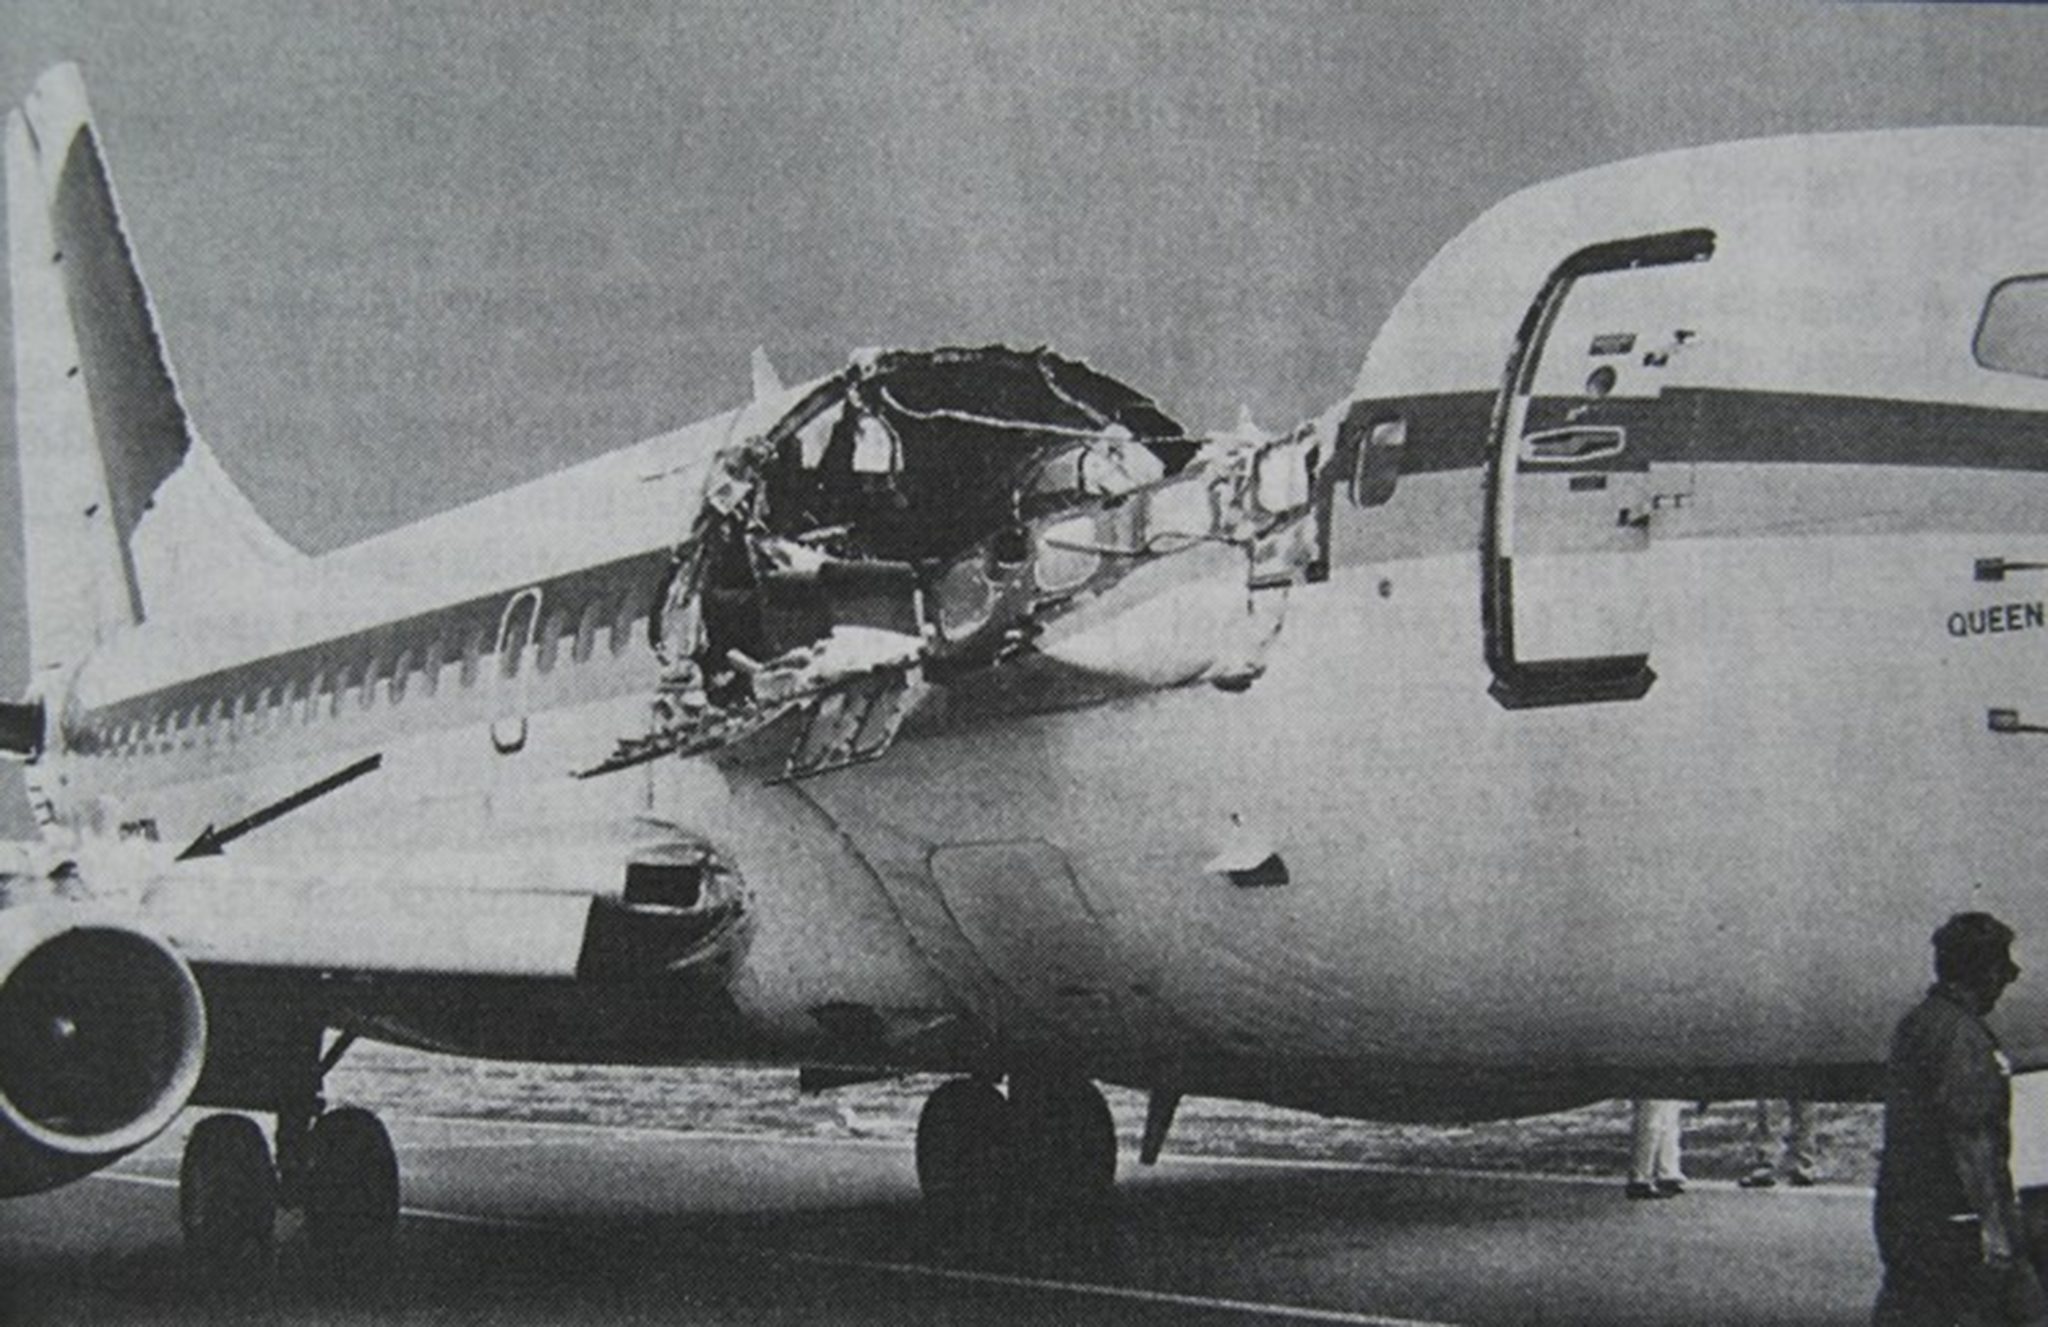 Veteran flight attendant Clarabelle “C.B.” Lansing, known for her loyal work and style of wearing flowers in her hair, was tragically sucked from the aircraft when the fuselage came apart; her body was never found